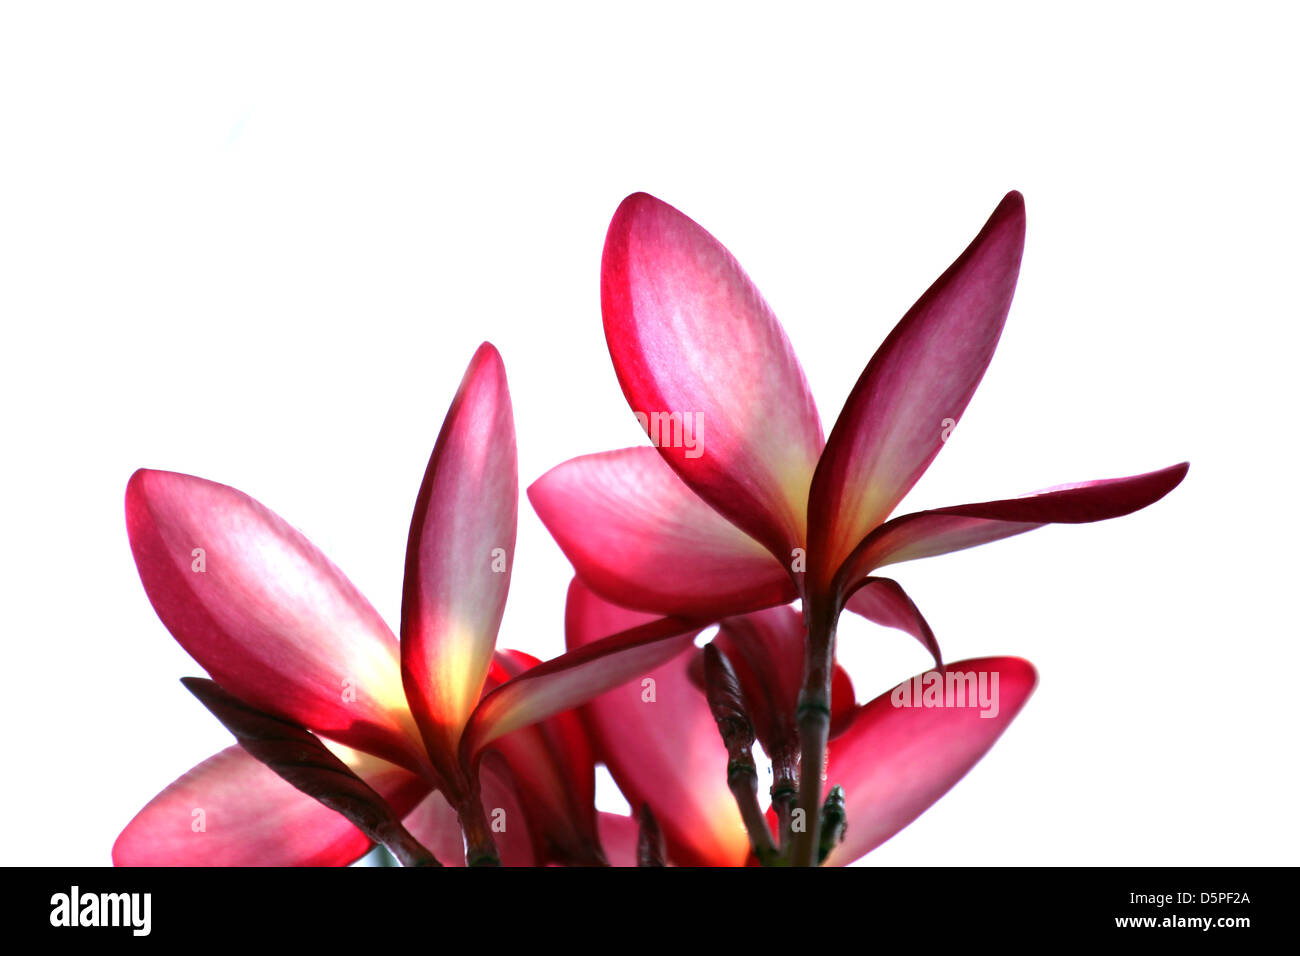 Pink Frangipani flowers,The flowers on the white Background. Stock Photo